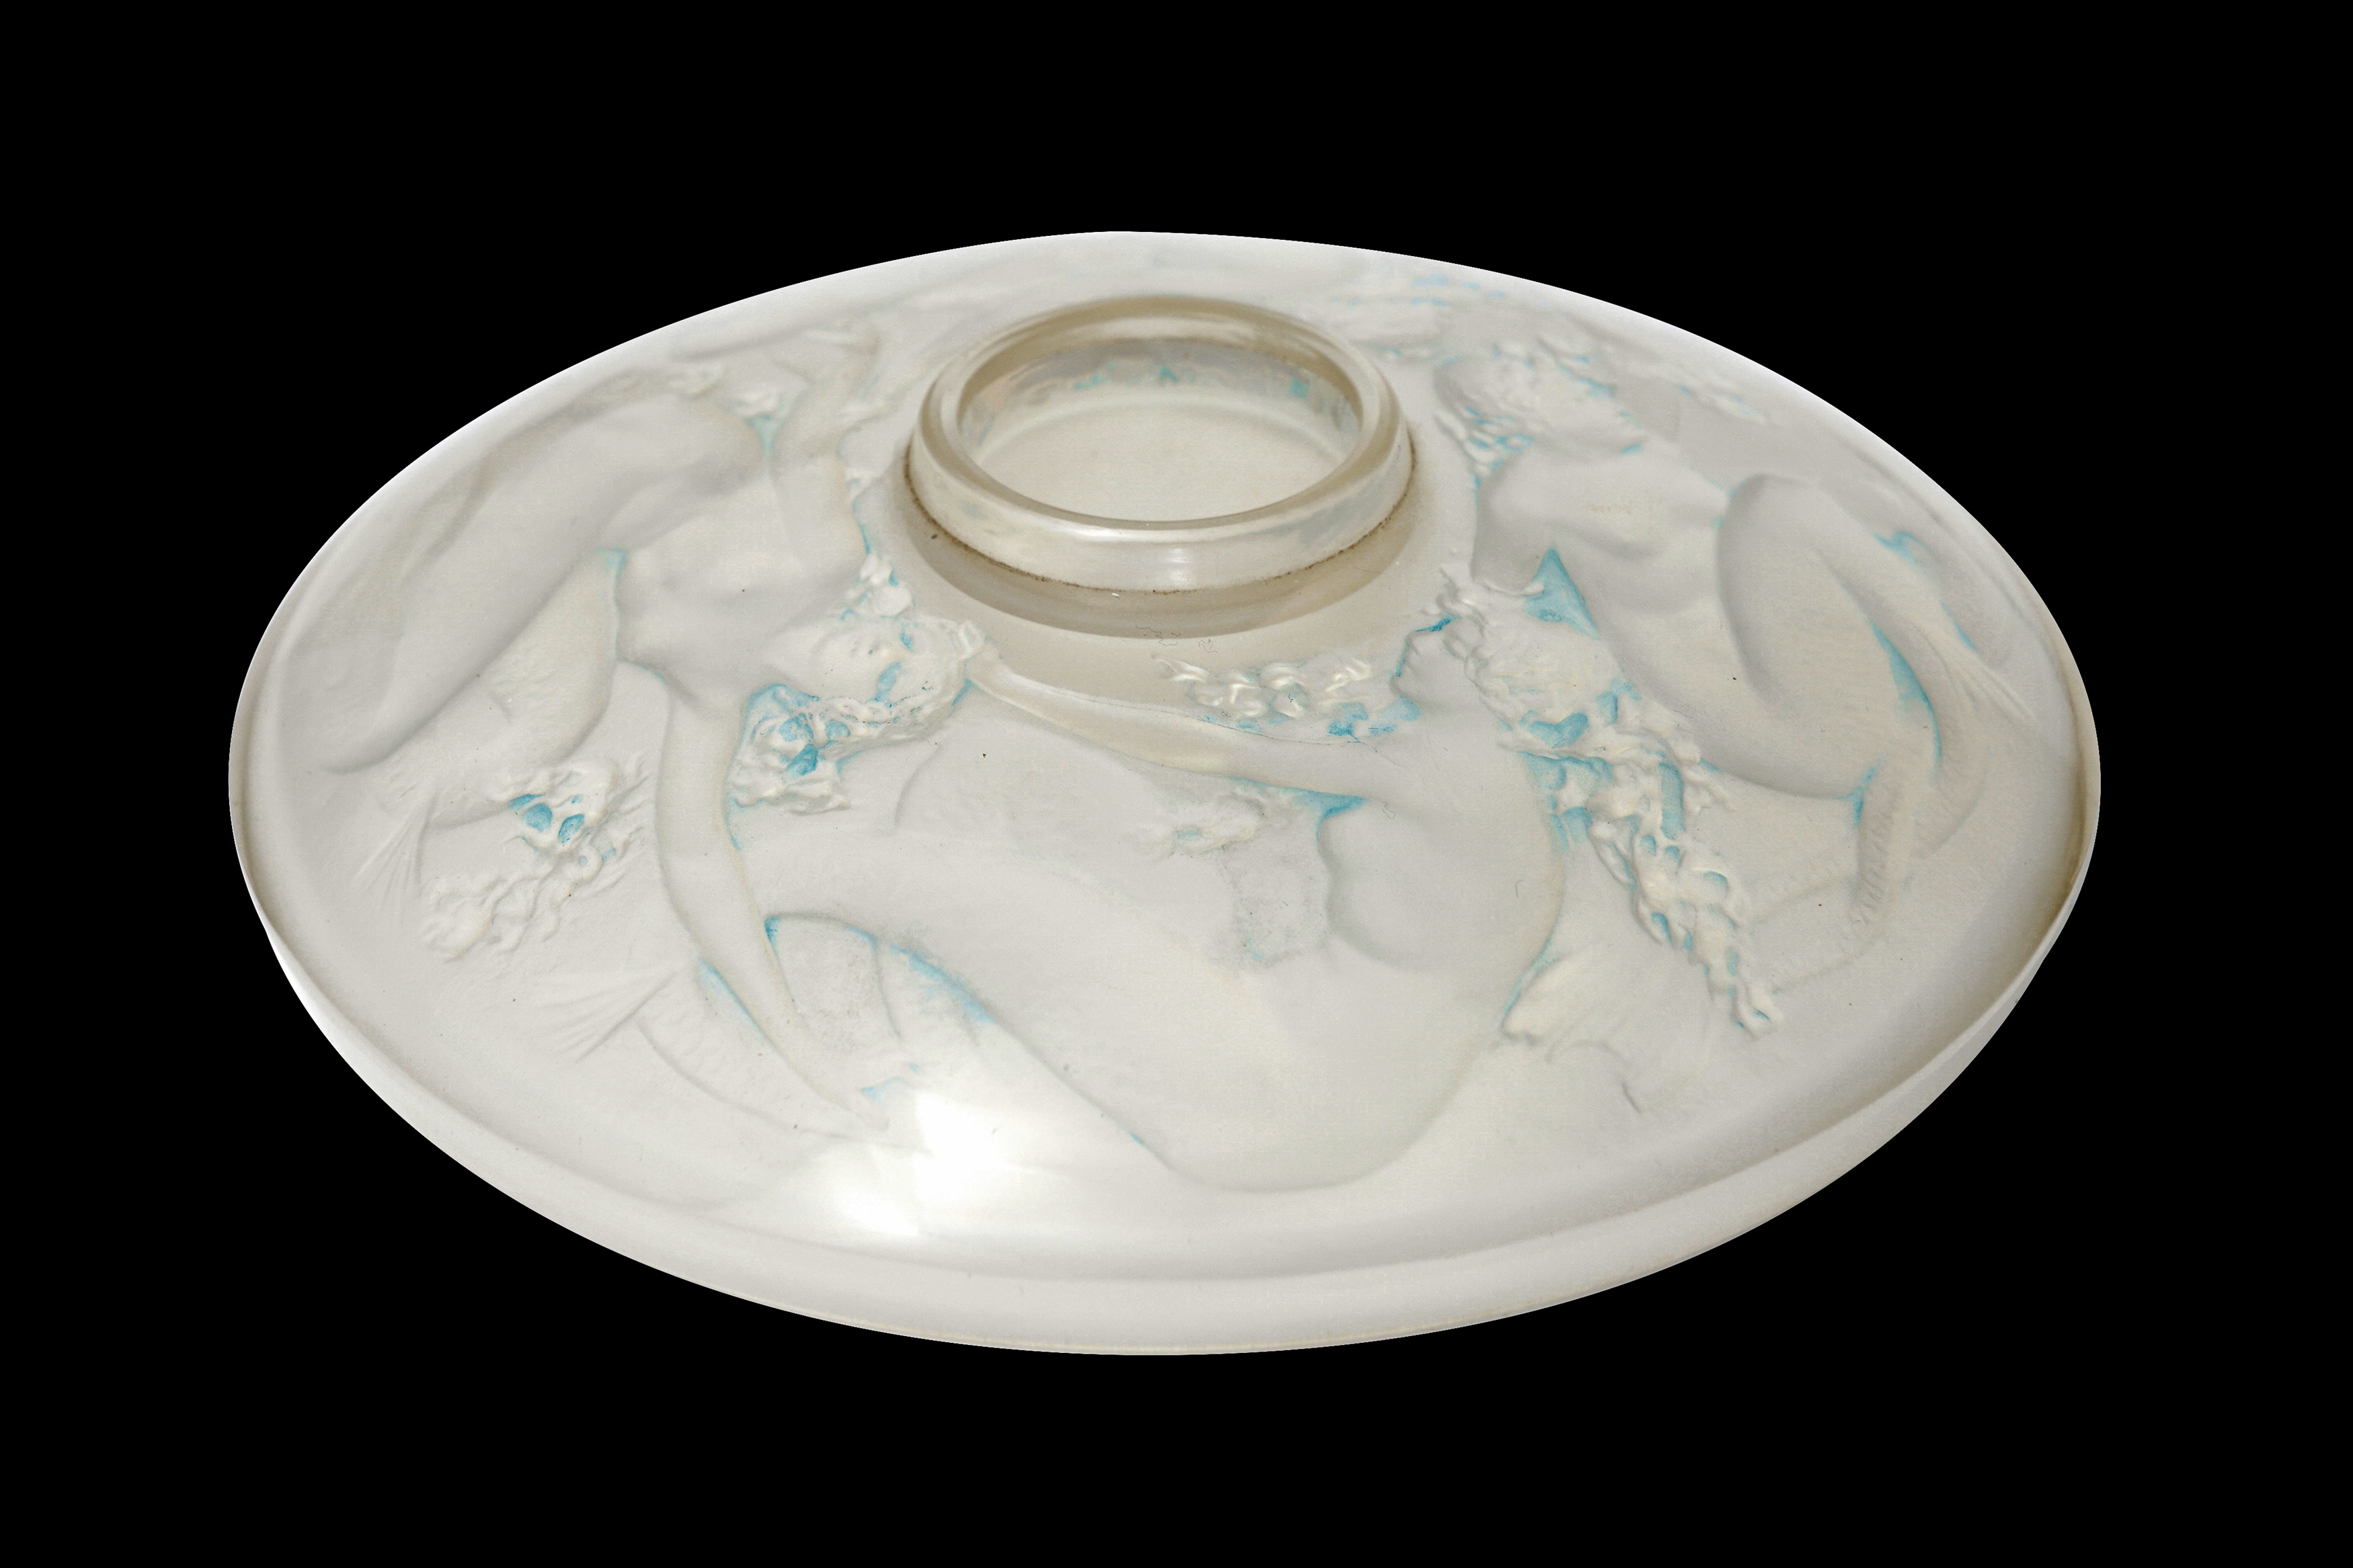 RENÉ LALIQUE (FRENCH 1860-1945) Preview: Barley Mow Centre - Image 3 of 3